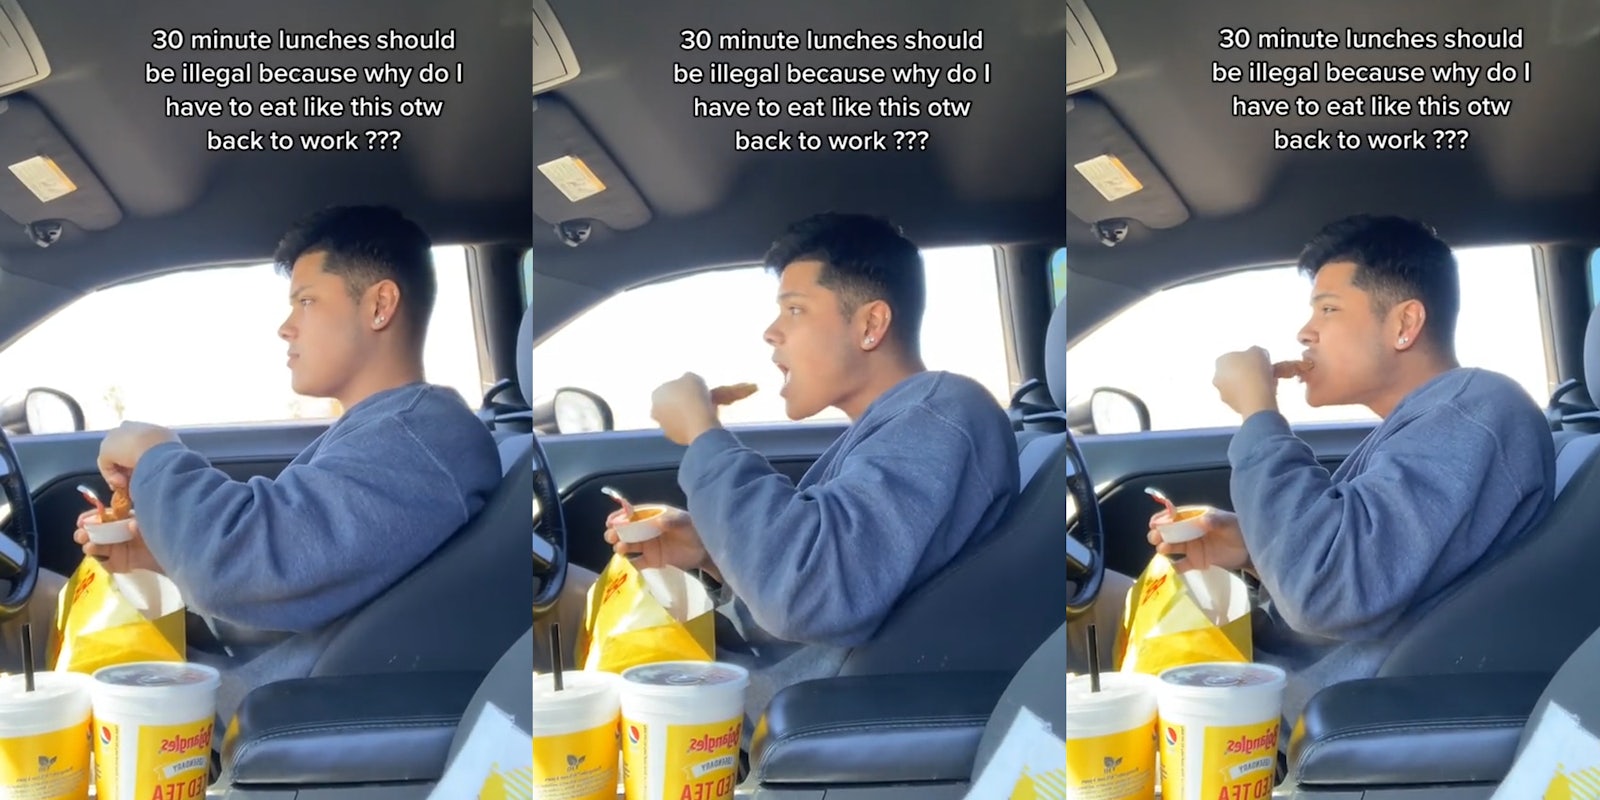 worker dipping chicken into sauce in car with caption '30 minute lunches should be illegal because why do I have to eat like this otw back to work ???' (l) worker holding chicken up to mouth in car with caption '30 minute lunches should be illegal because why do I have to eat like this otw back to work ???' (c) worker biting chicken in car with caption '30 minute lunches should be illegal because why do I have to eat like this otw back to work ???' (r)